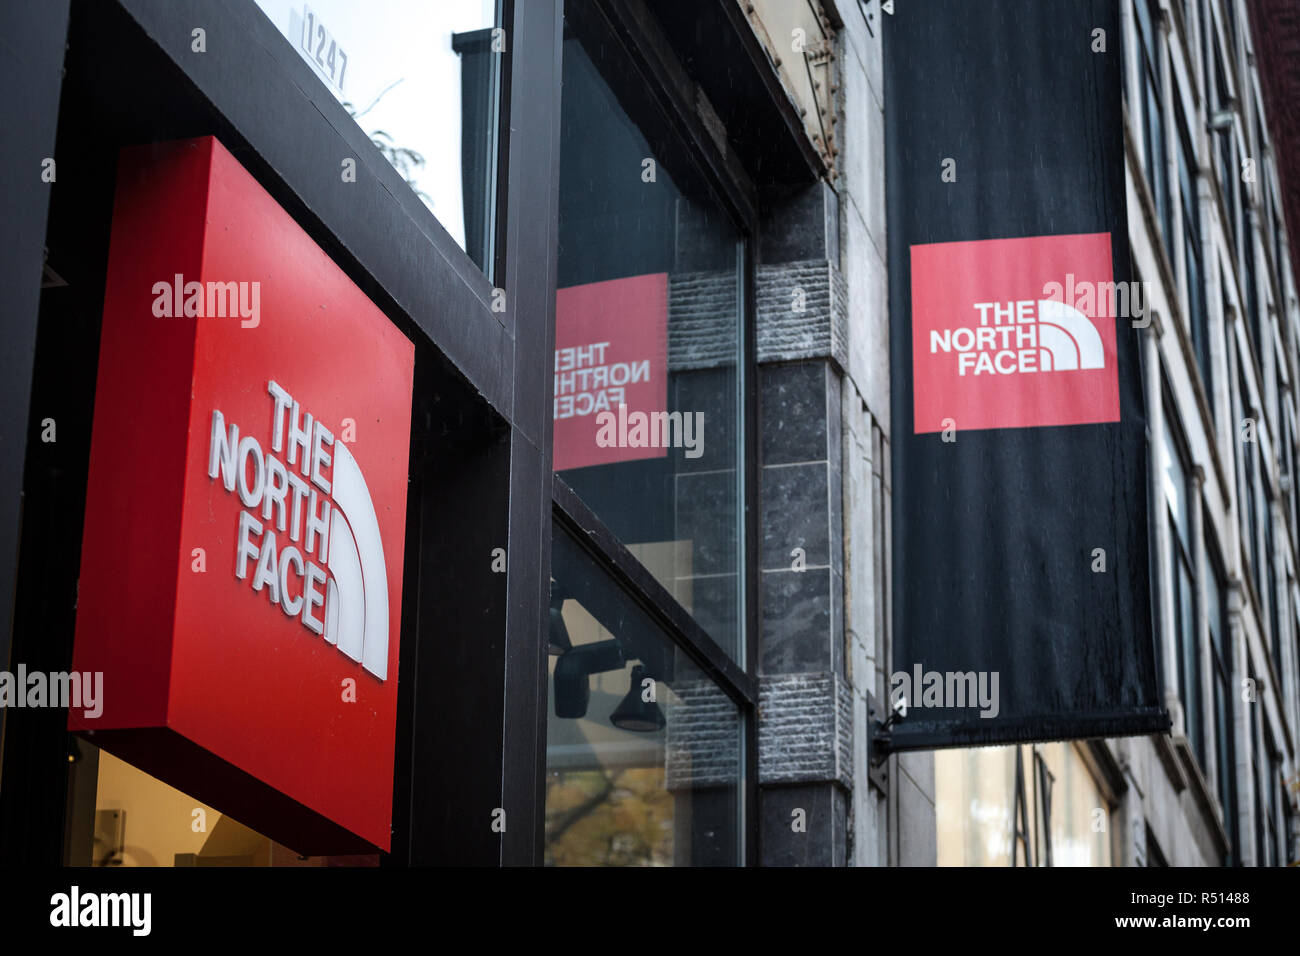 The North Face Shop High Resolution Stock Photography and Images - Alamy